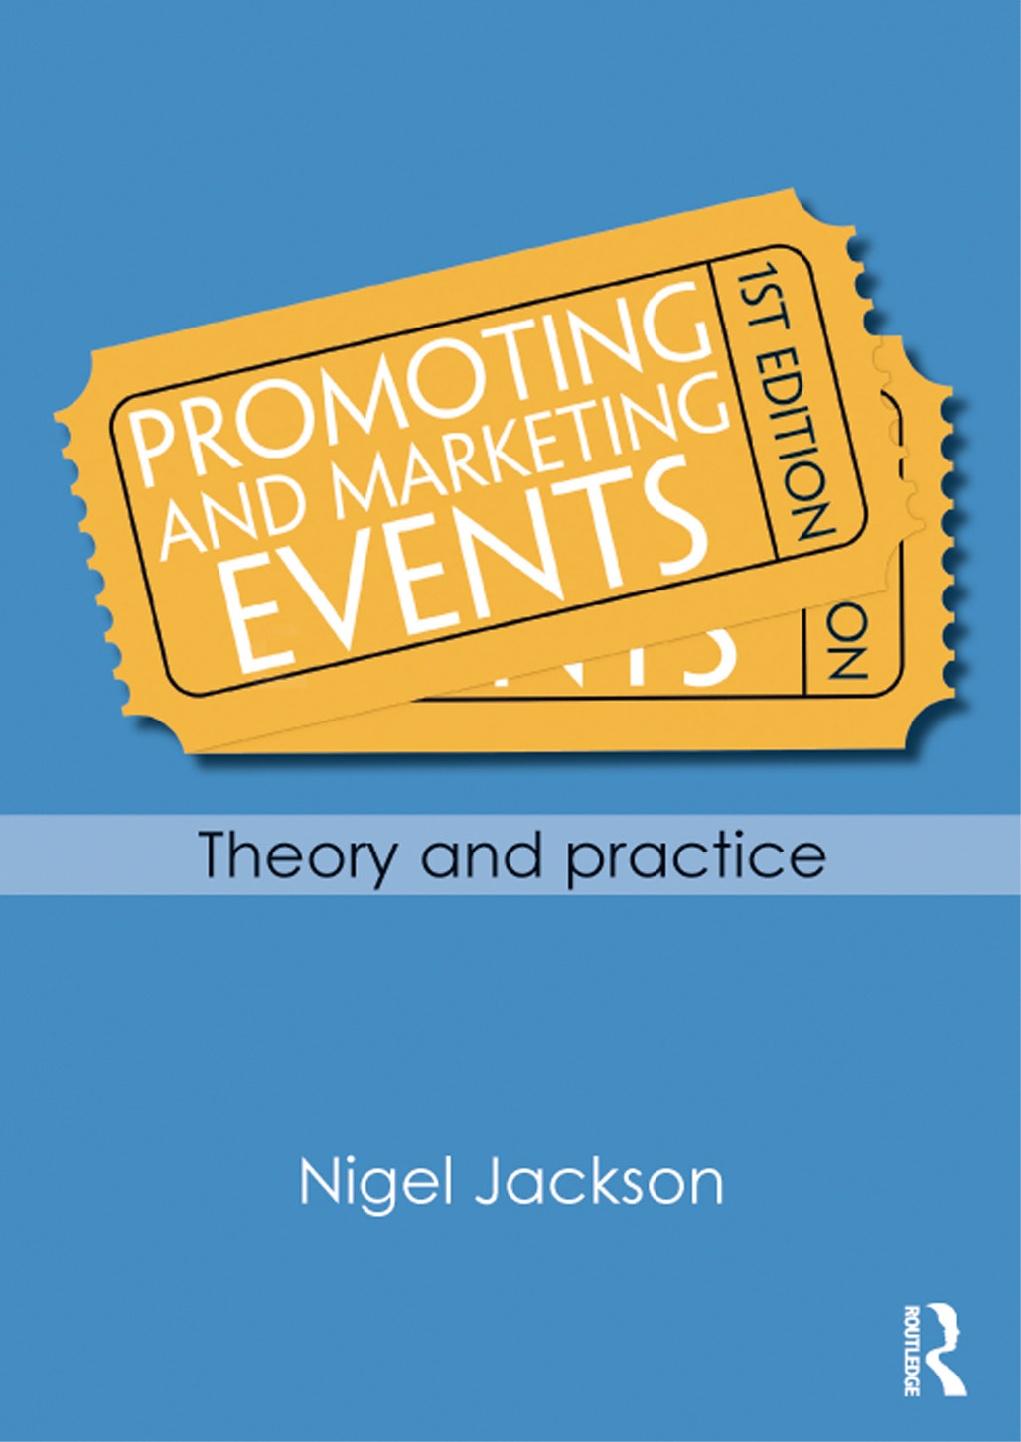 Promoting and Marketing Events: Theory and practice